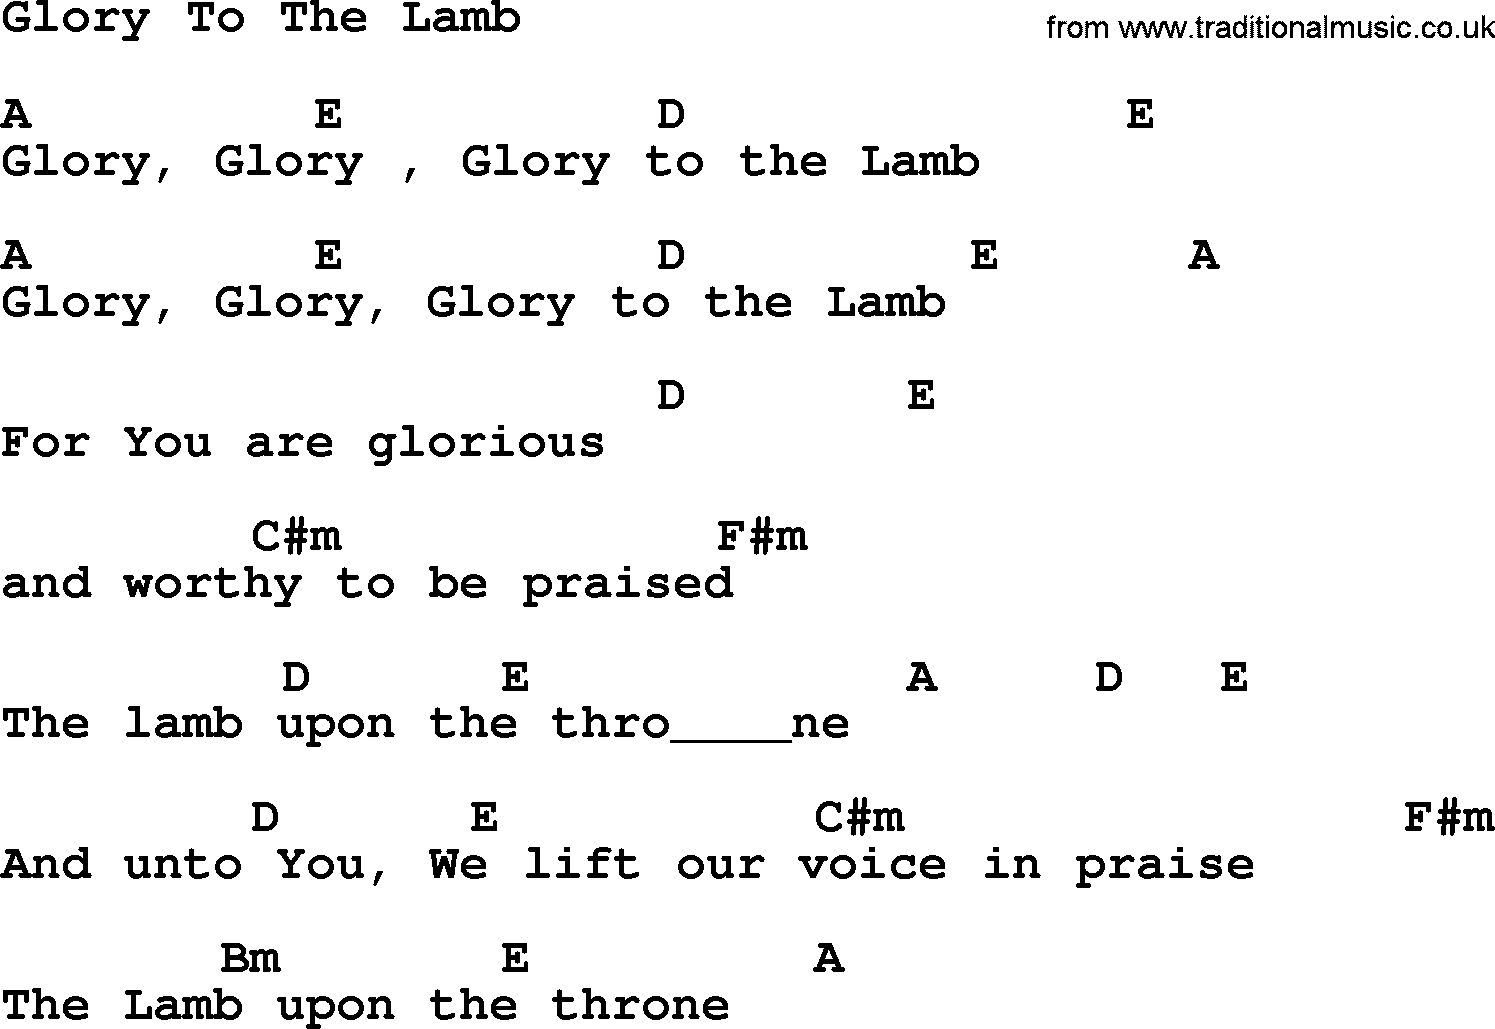 Ascensiontide Hynms collection, Hymn: Glory To The Lamb lyrics, chords and PDF